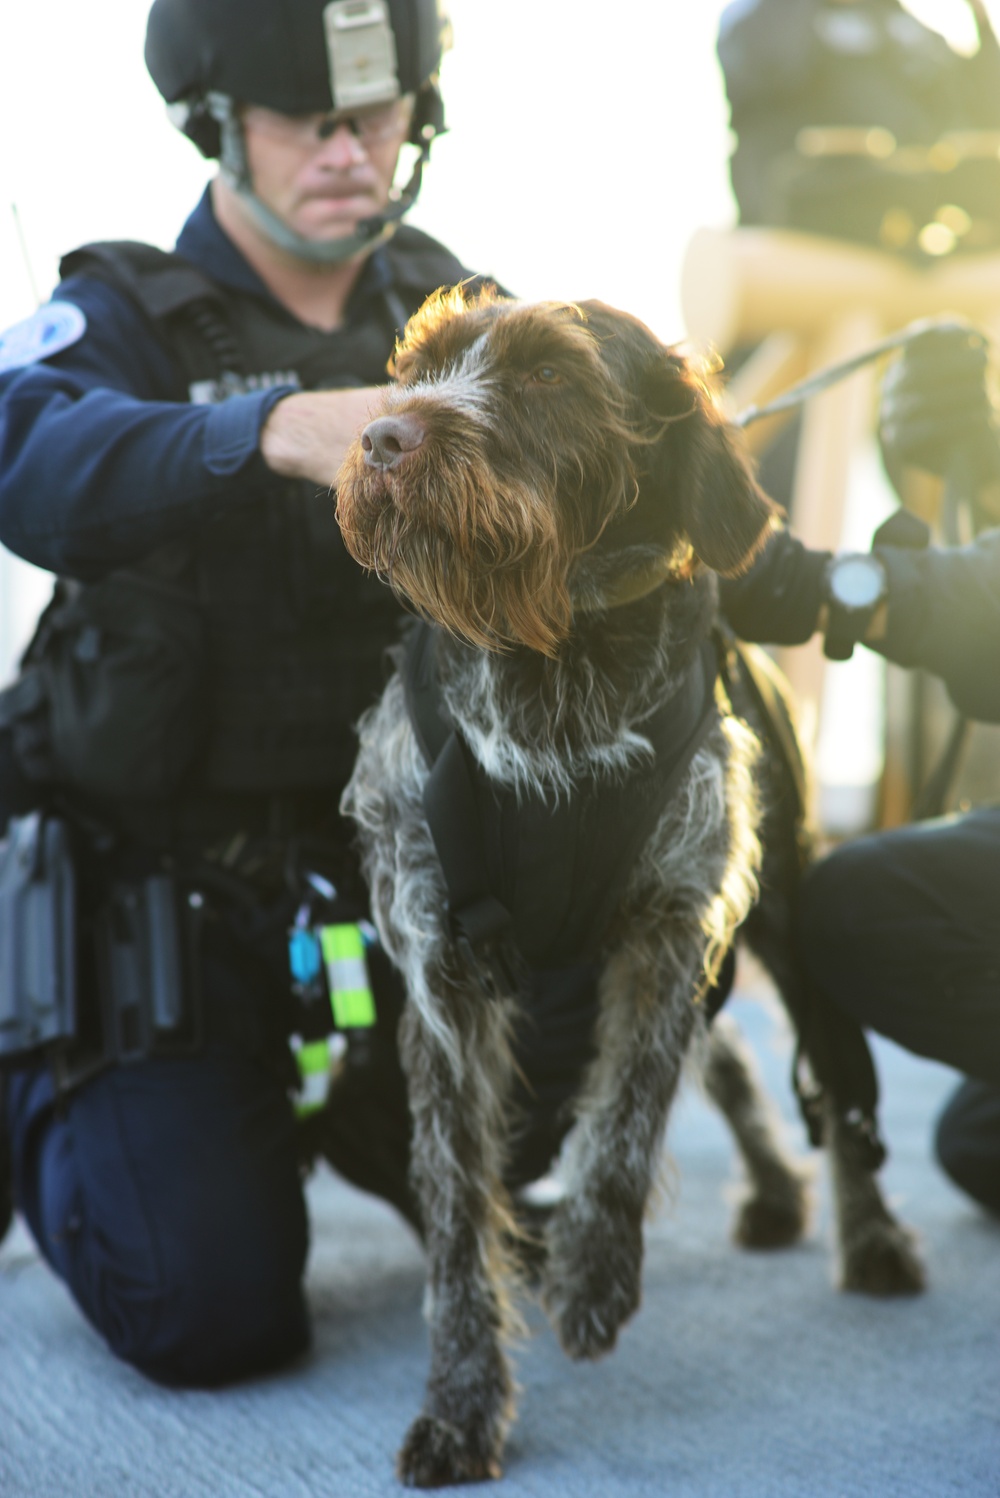 An explosive detection K-9 gets harness secured for helicopter hoisting operations